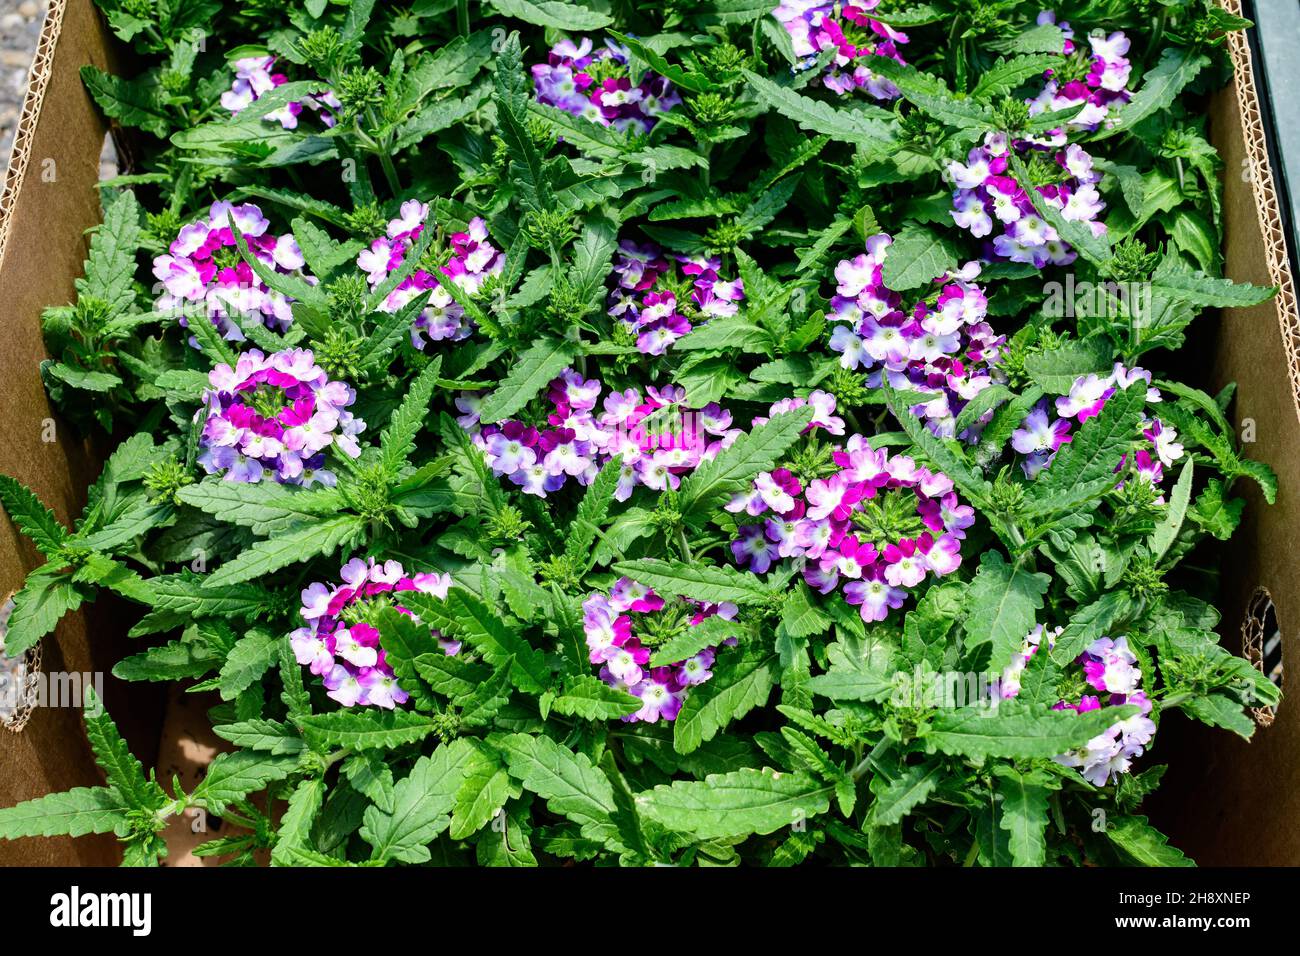 Many delicate vivid pink and white flowers of Verbena Hybrida Nana Compacta plant in small garden pots displayed for sale at a market in a sunny summe Stock Photo